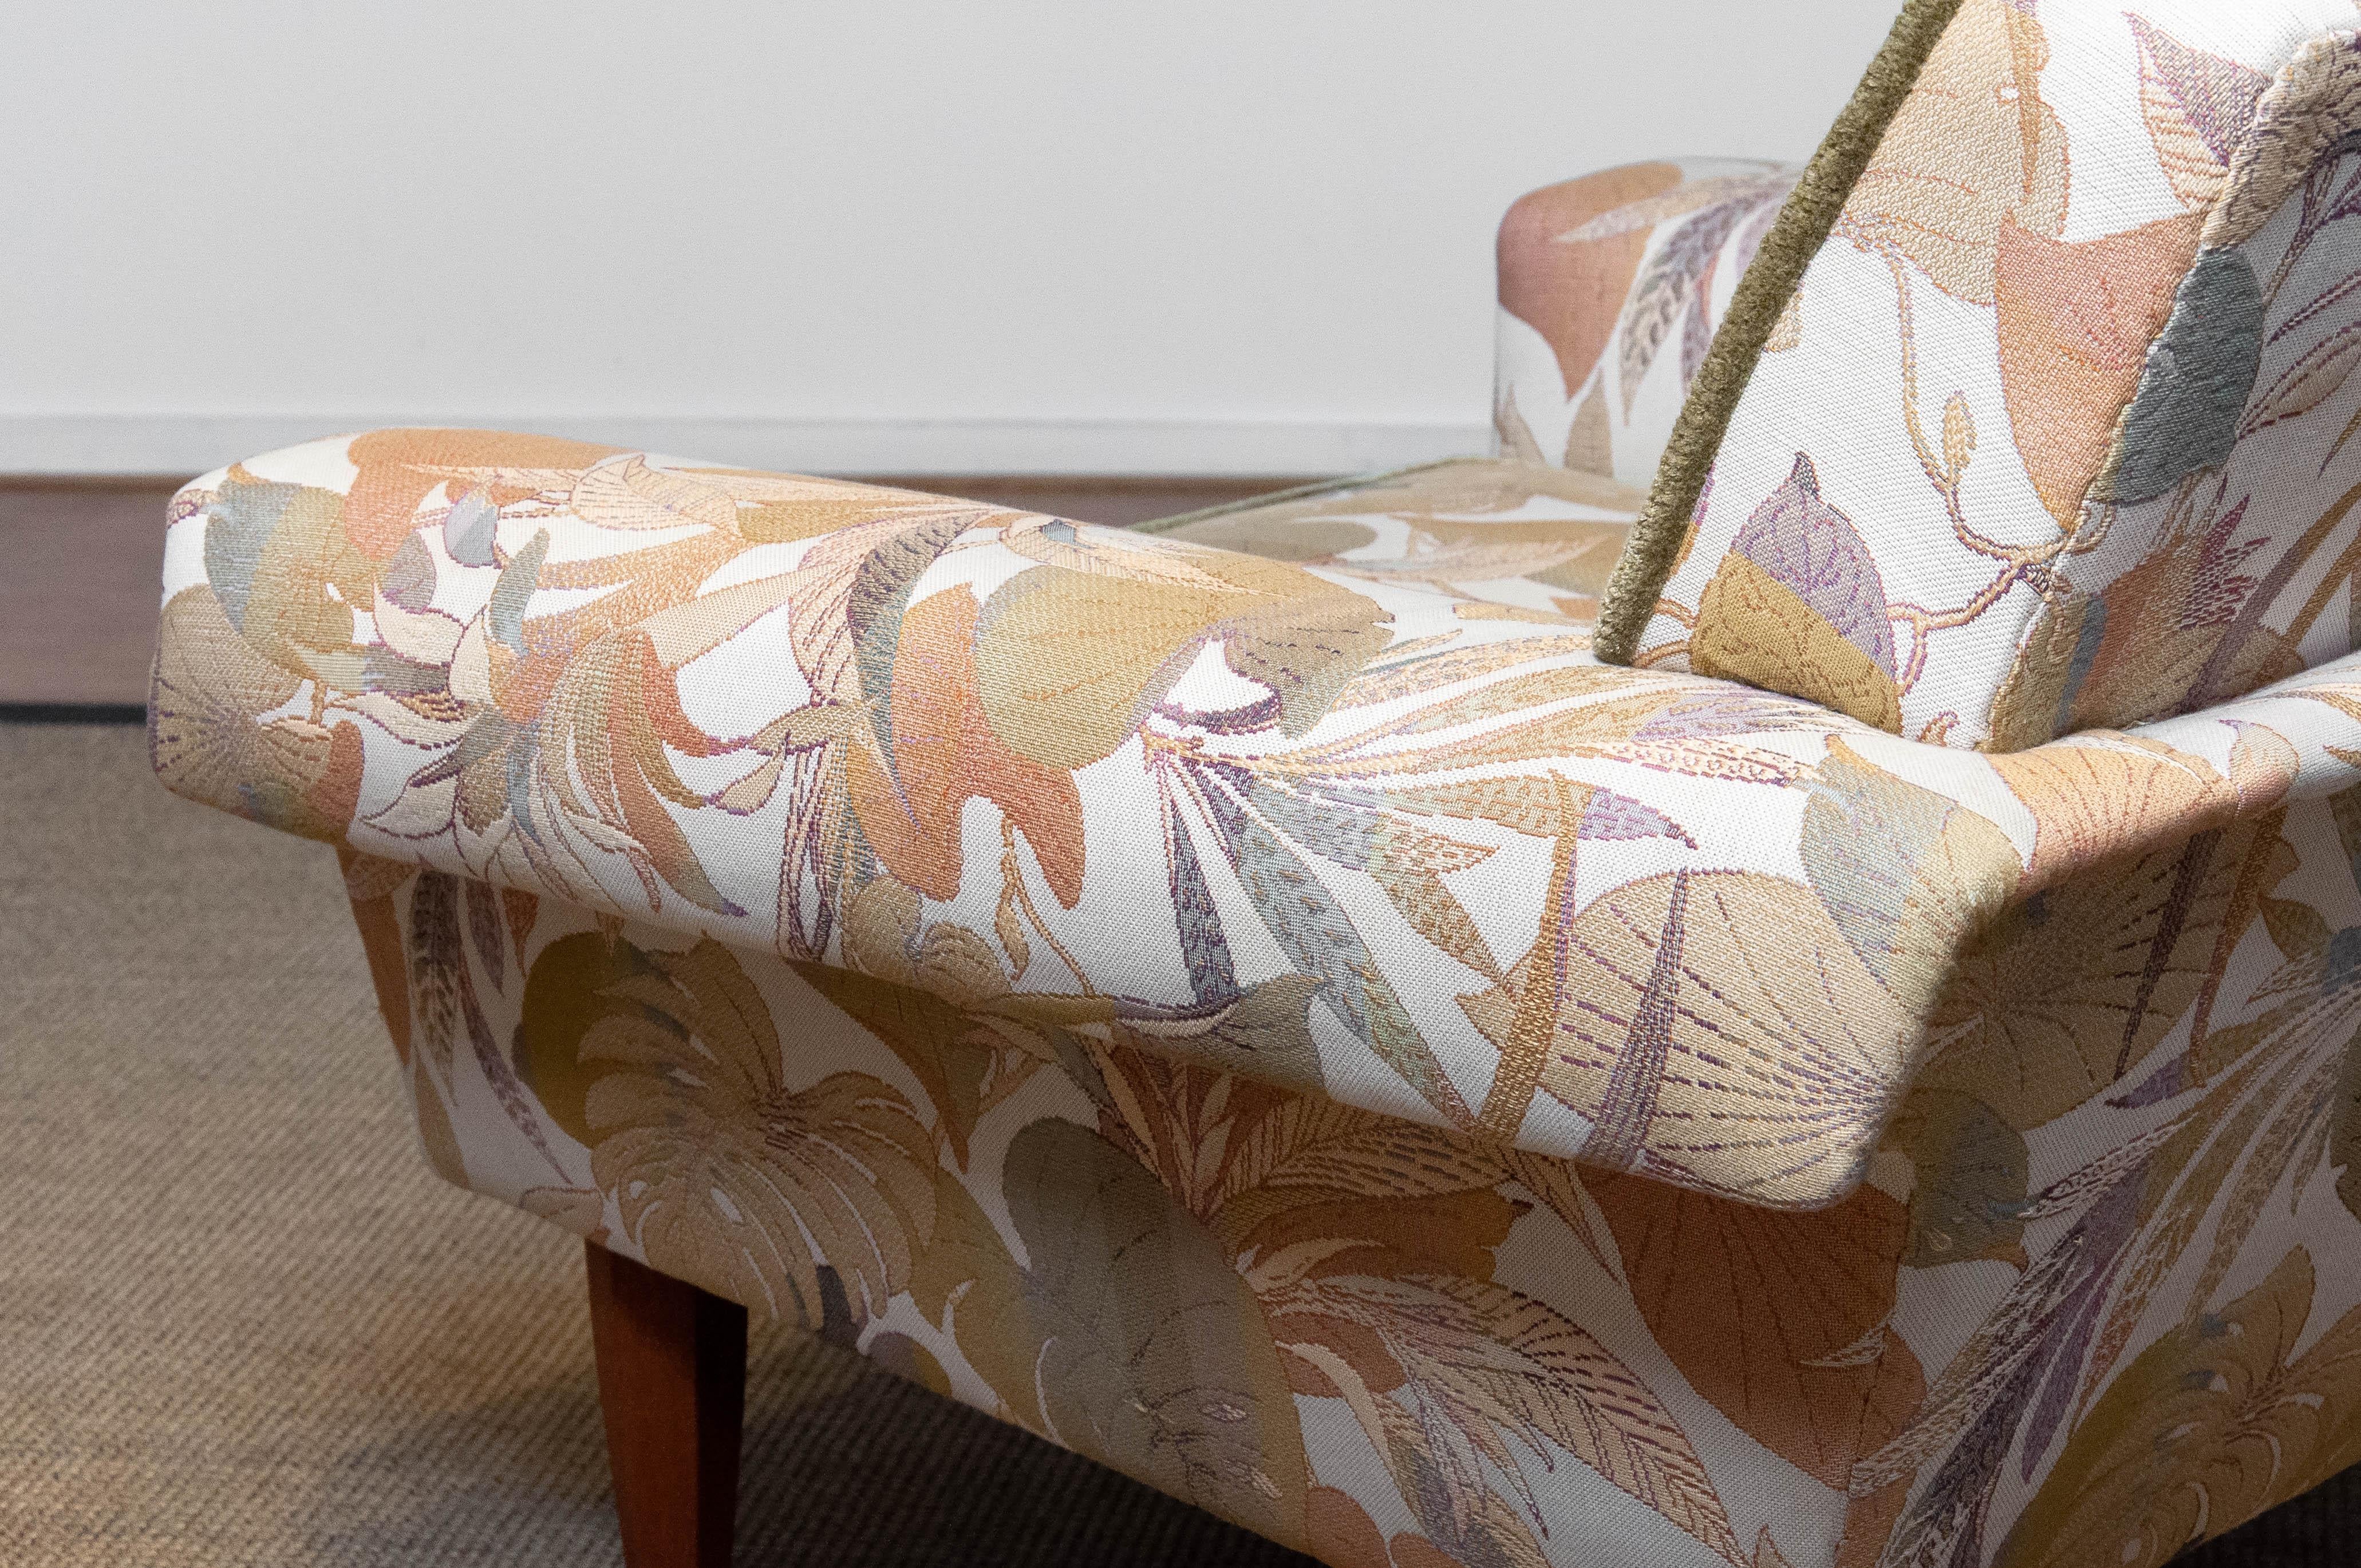 Mid-20th Century Danish Low Back Lounge Chair Upholstered Floral Jacquard Fabric from the 1970's For Sale